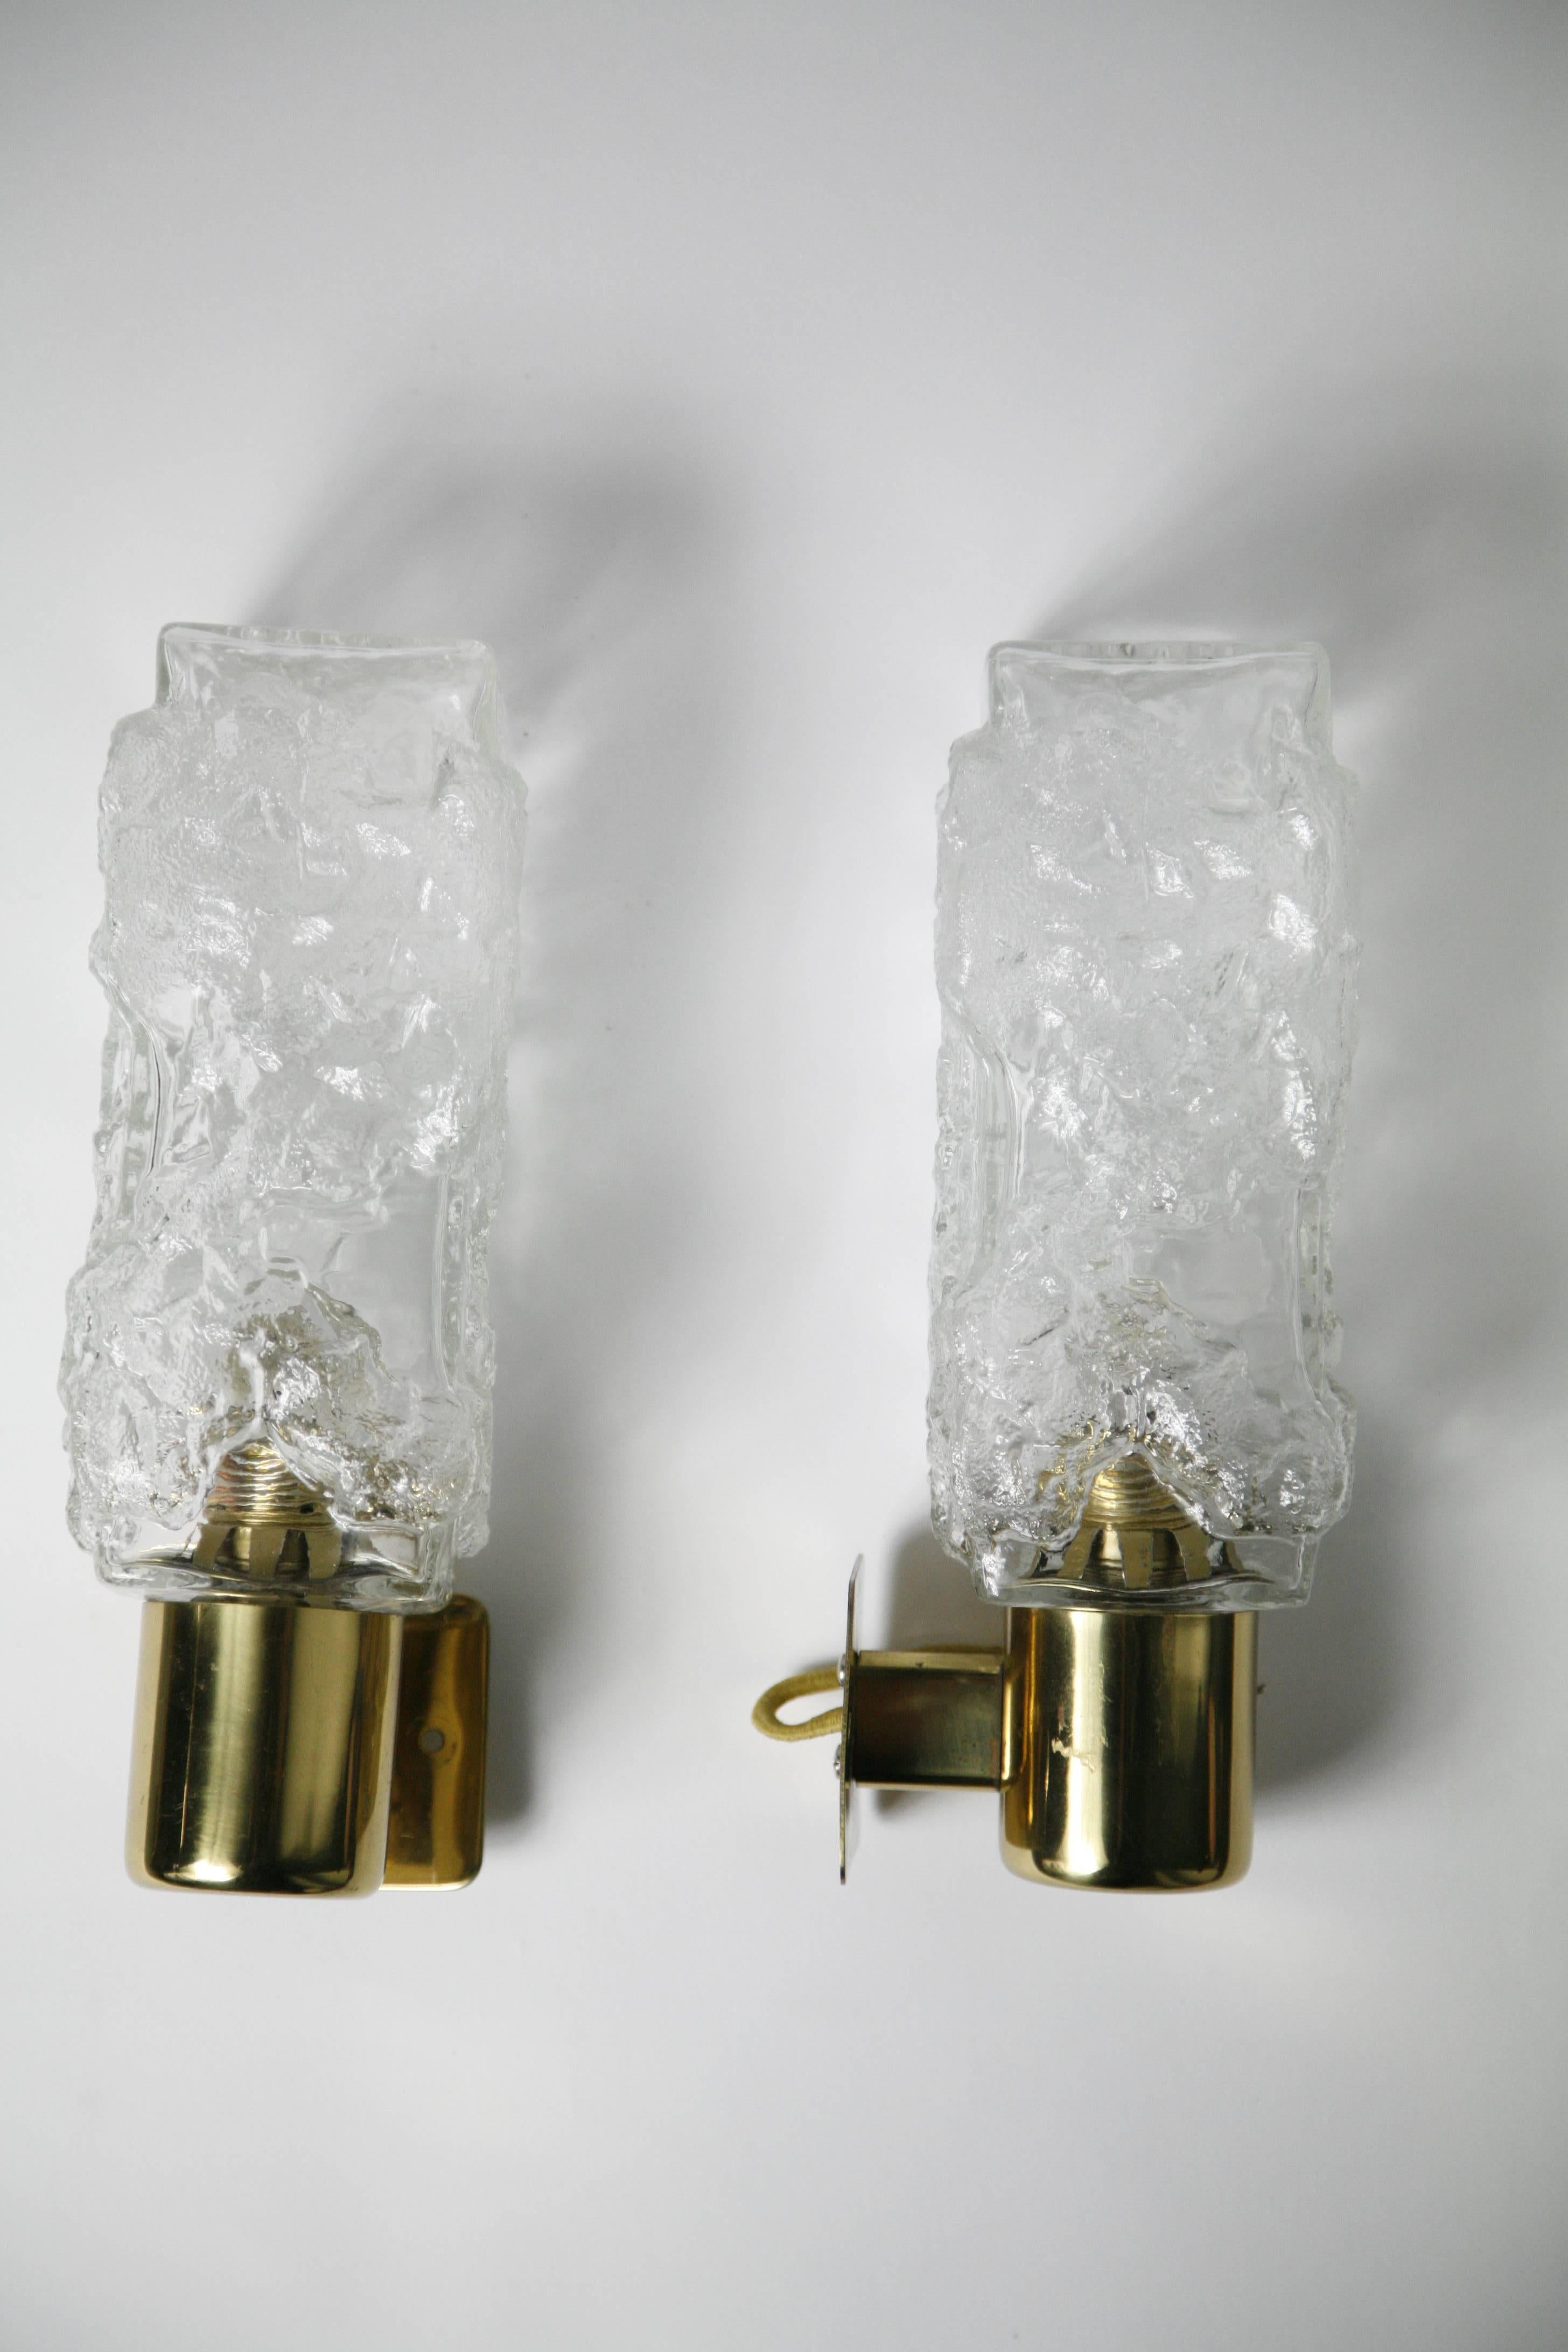 Kalmar wall lights gold and glass shades, 1970 Austria Vienna
Pair of Kalmar brass wall lights on a steel frame with gold/brass plating a square hollow glass with organically shaped pattern to the glass holds one European candelabra socket.
This